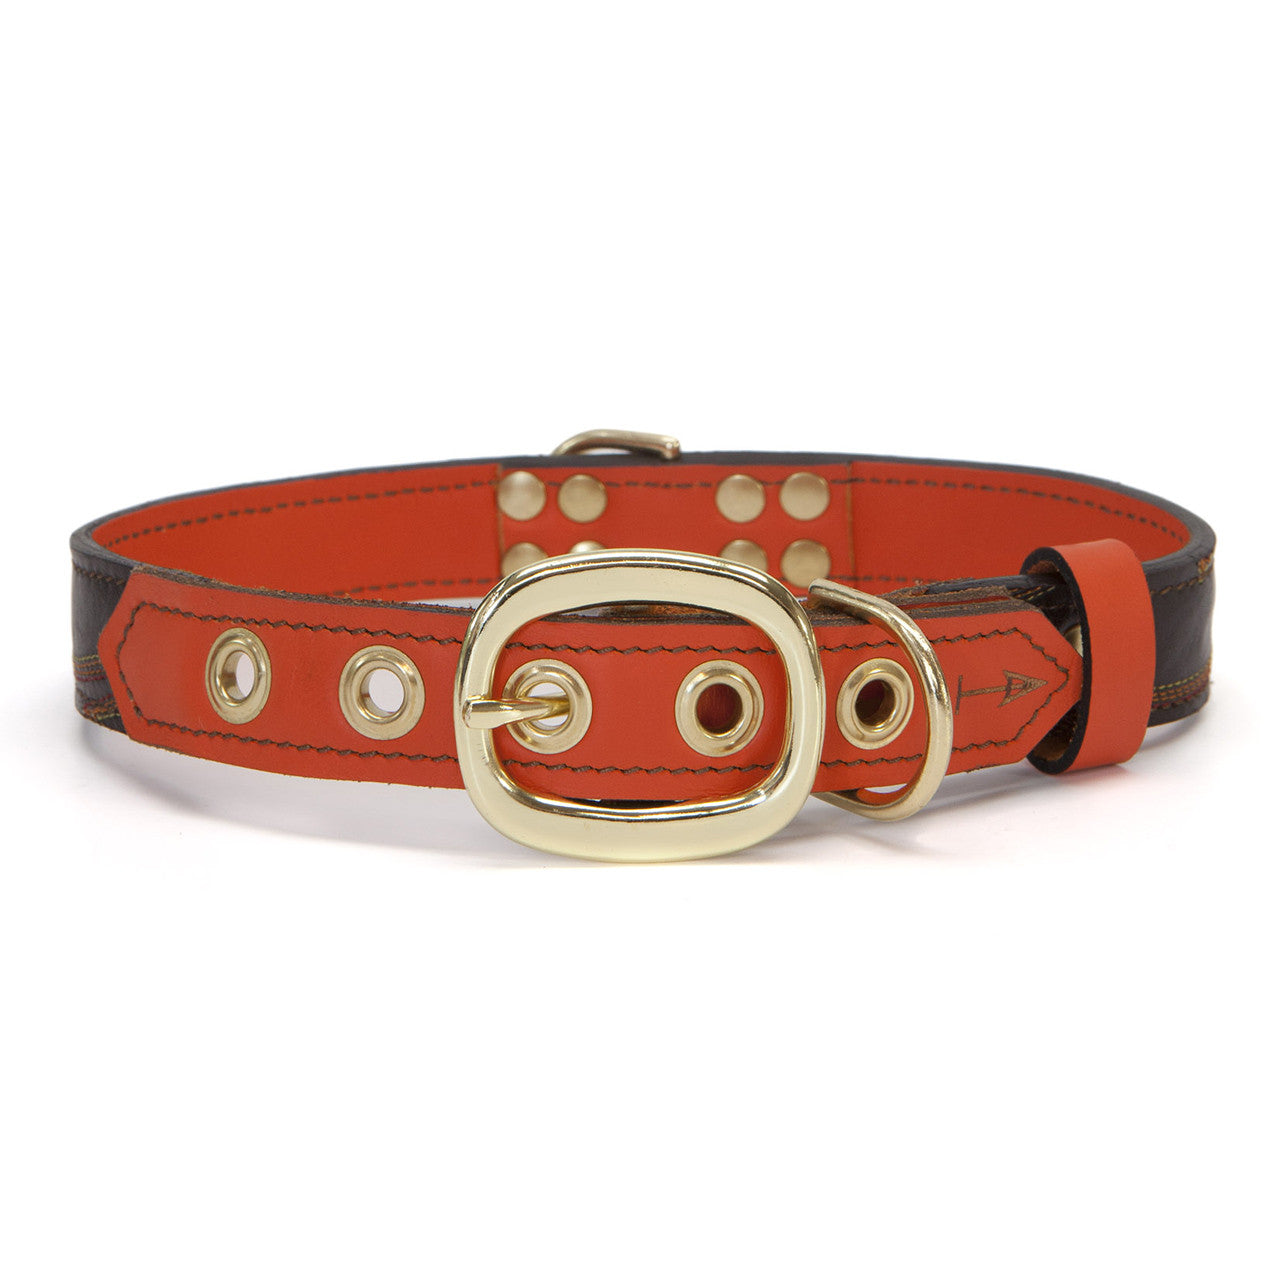 Orange Dog Collar with Medium Brown Leather + Multicolor Stitching (back view)